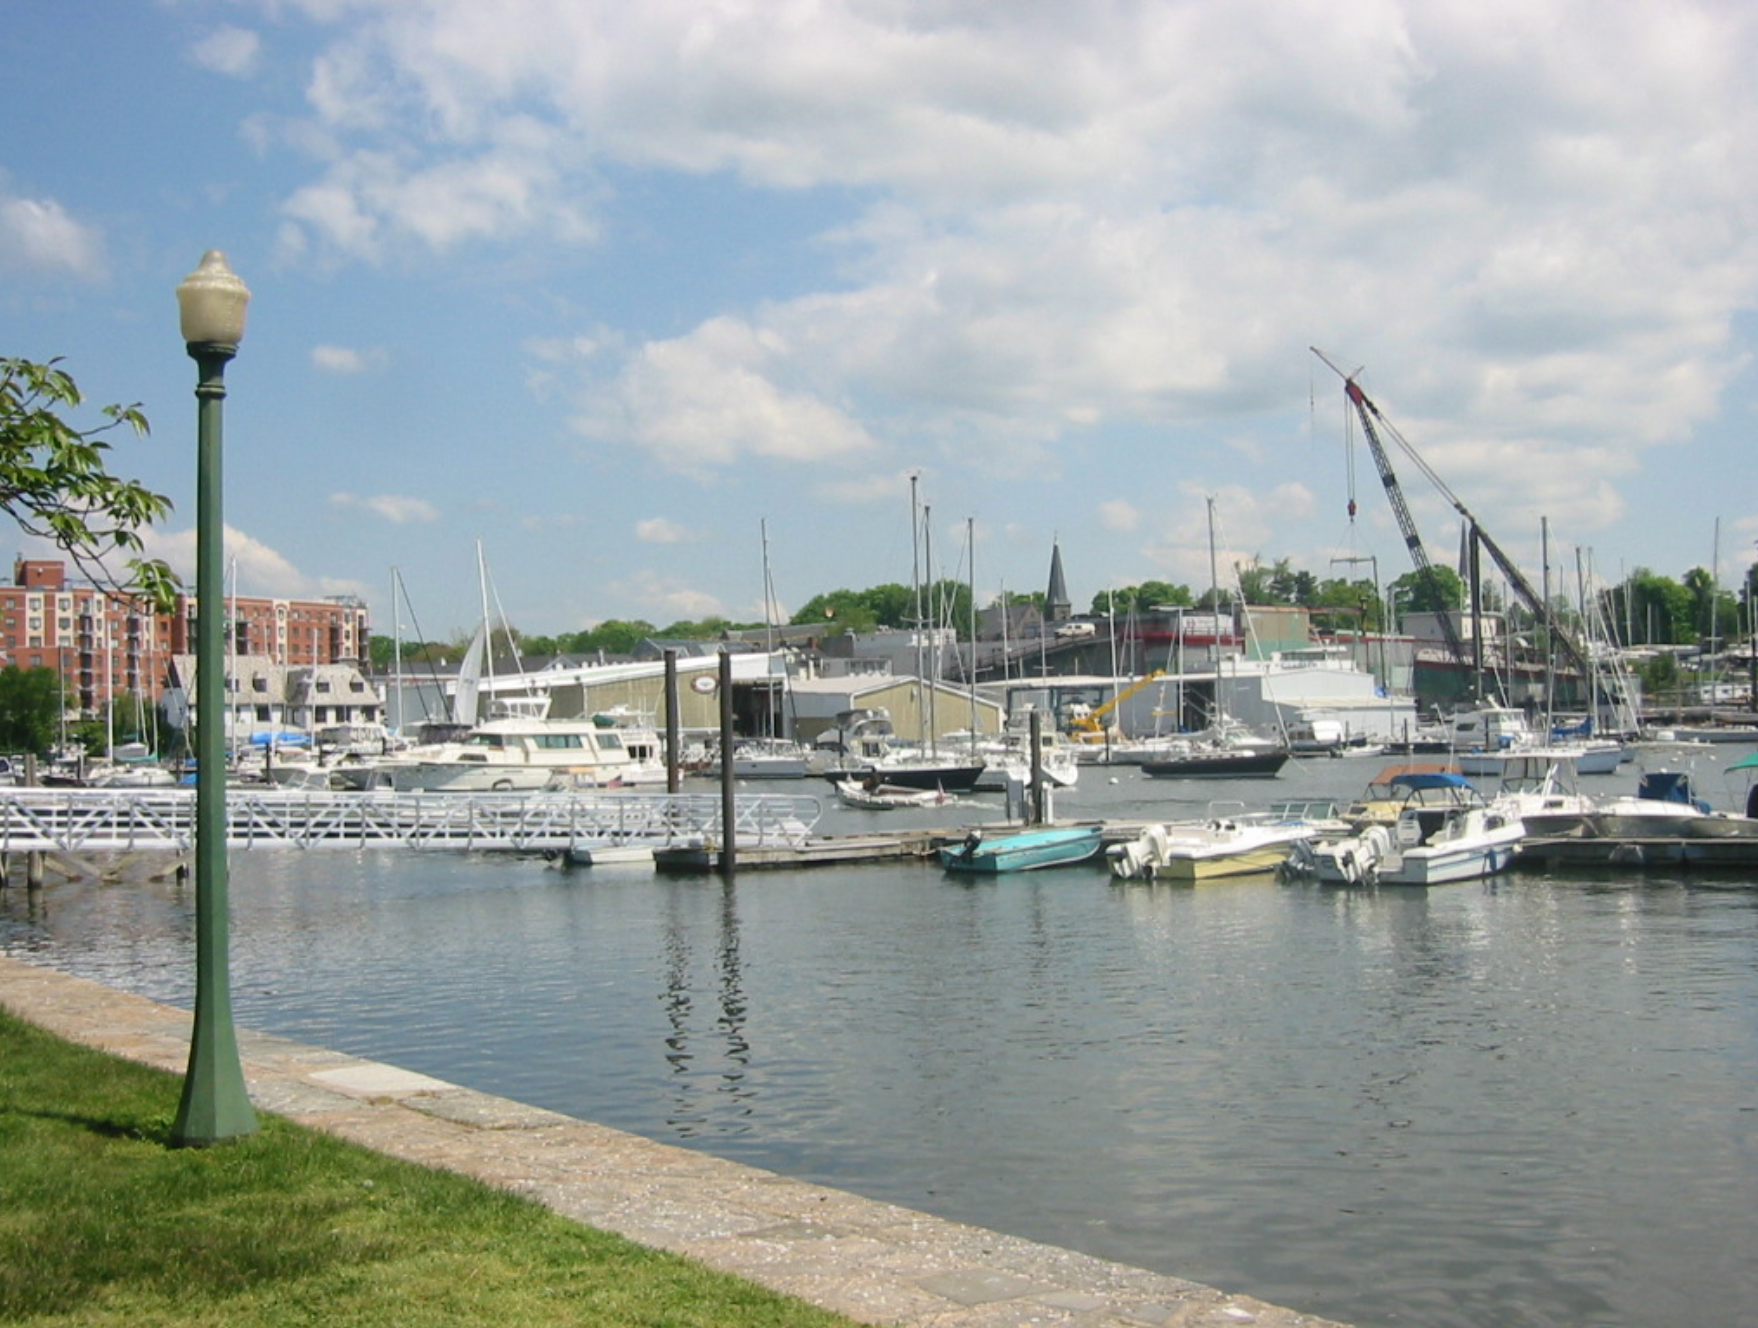 View of the Mamaroneck Harbor in Mamaroneck, New York